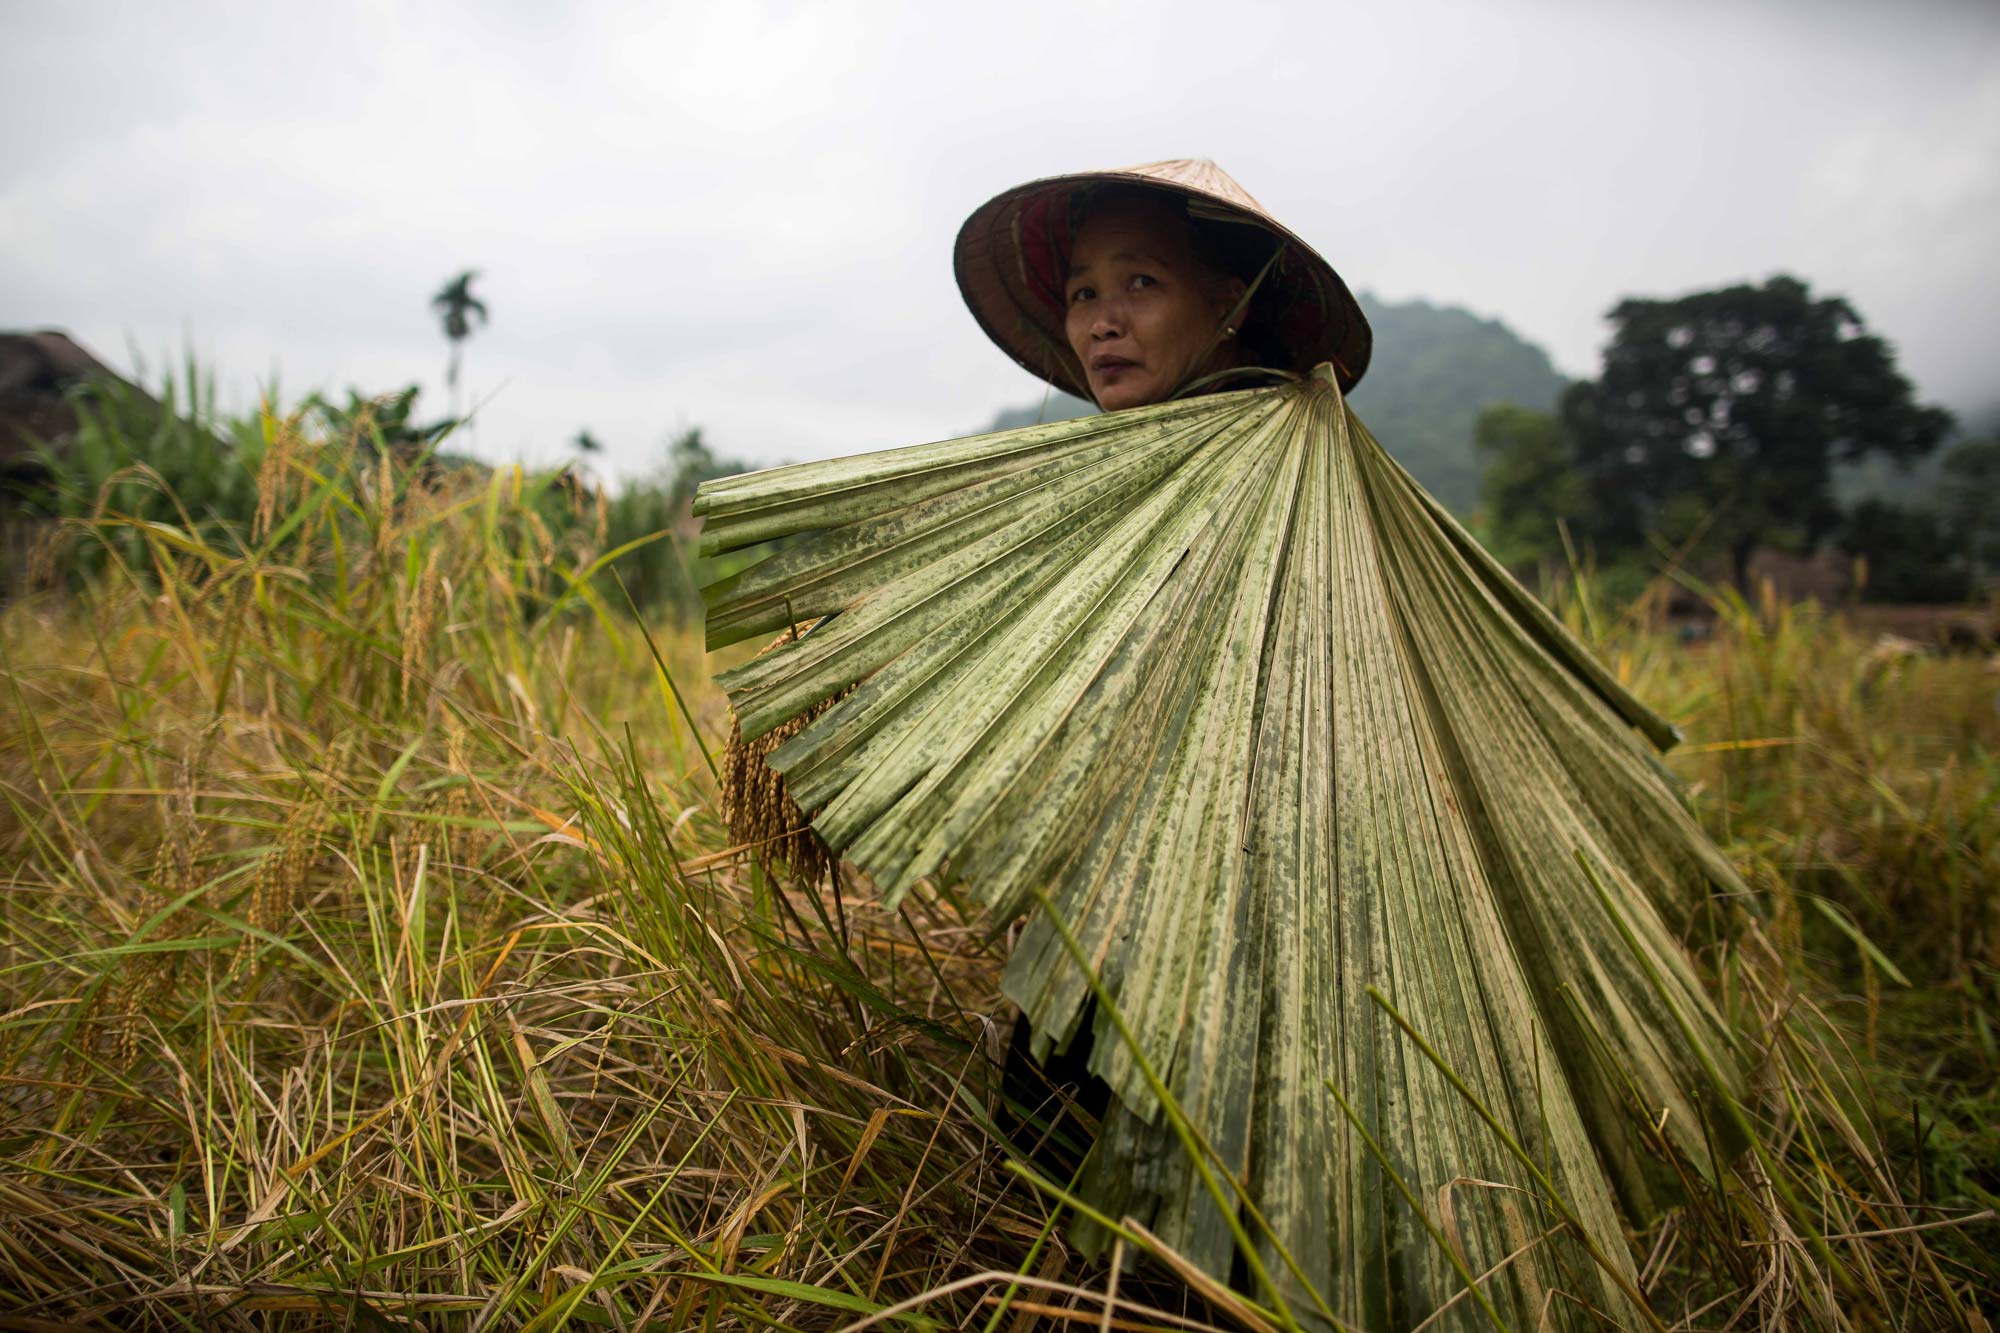 Portrait of a woman harvesting sticky rice and protecting herself from the sun with a palm leaf